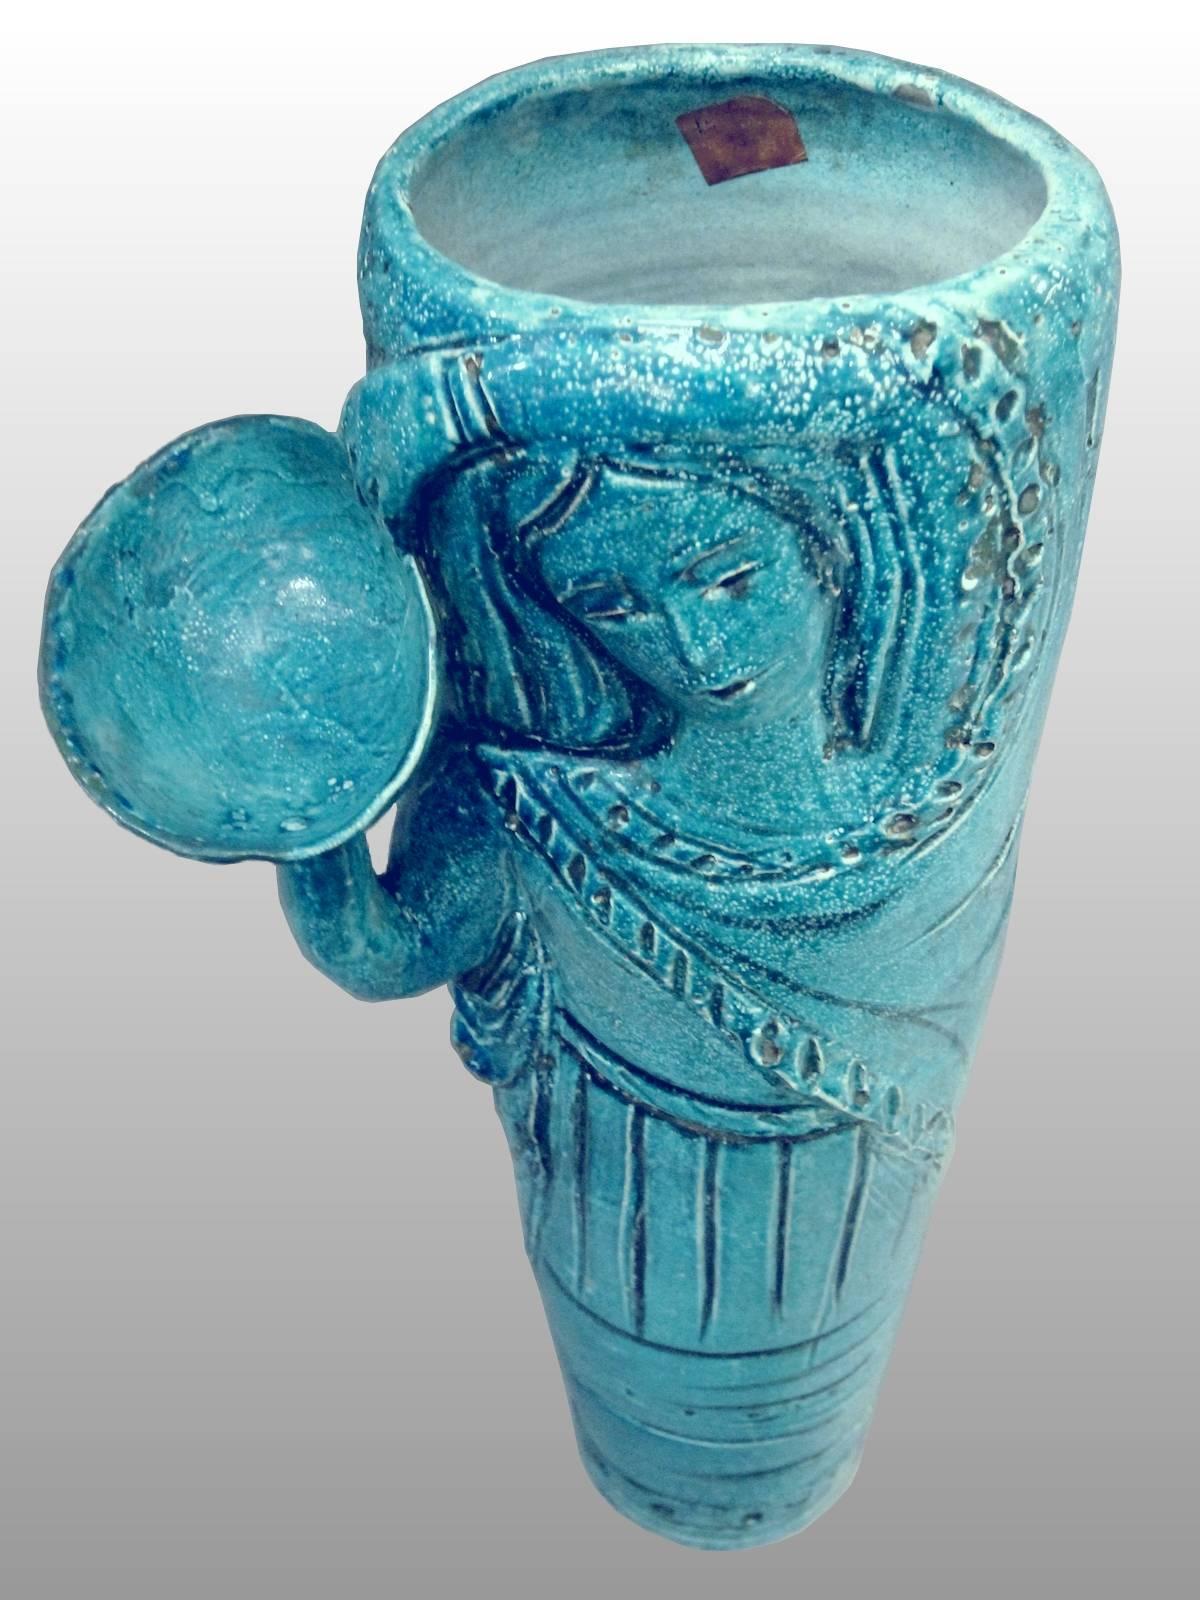 Vase-Sculpture in Blue Glazed Earthenware by Angelo Ungania, circa 1940 For Sale 1